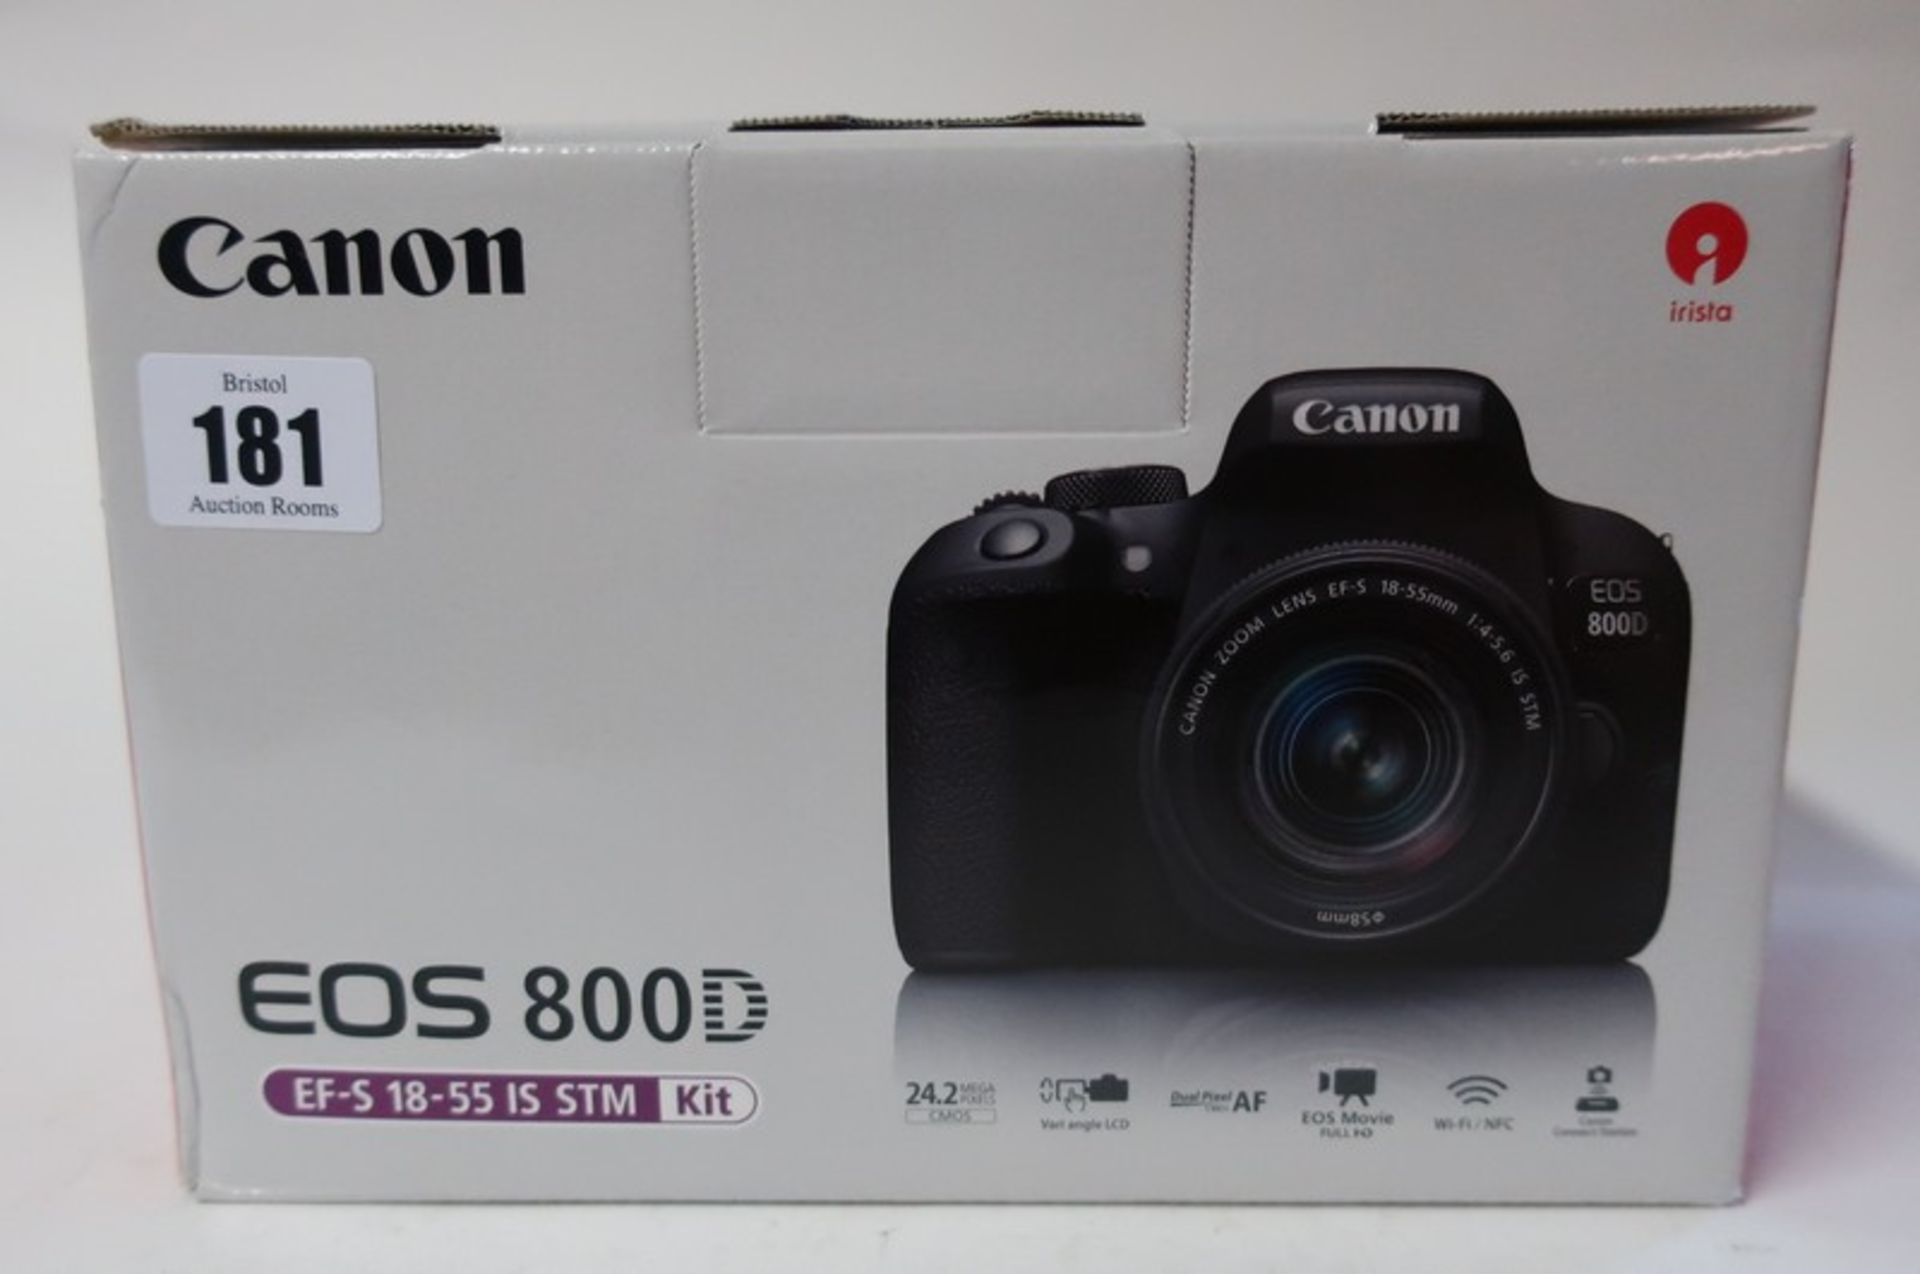 A boxed as new Canon EOS 800D EF-S 18-55 IS STM kits.